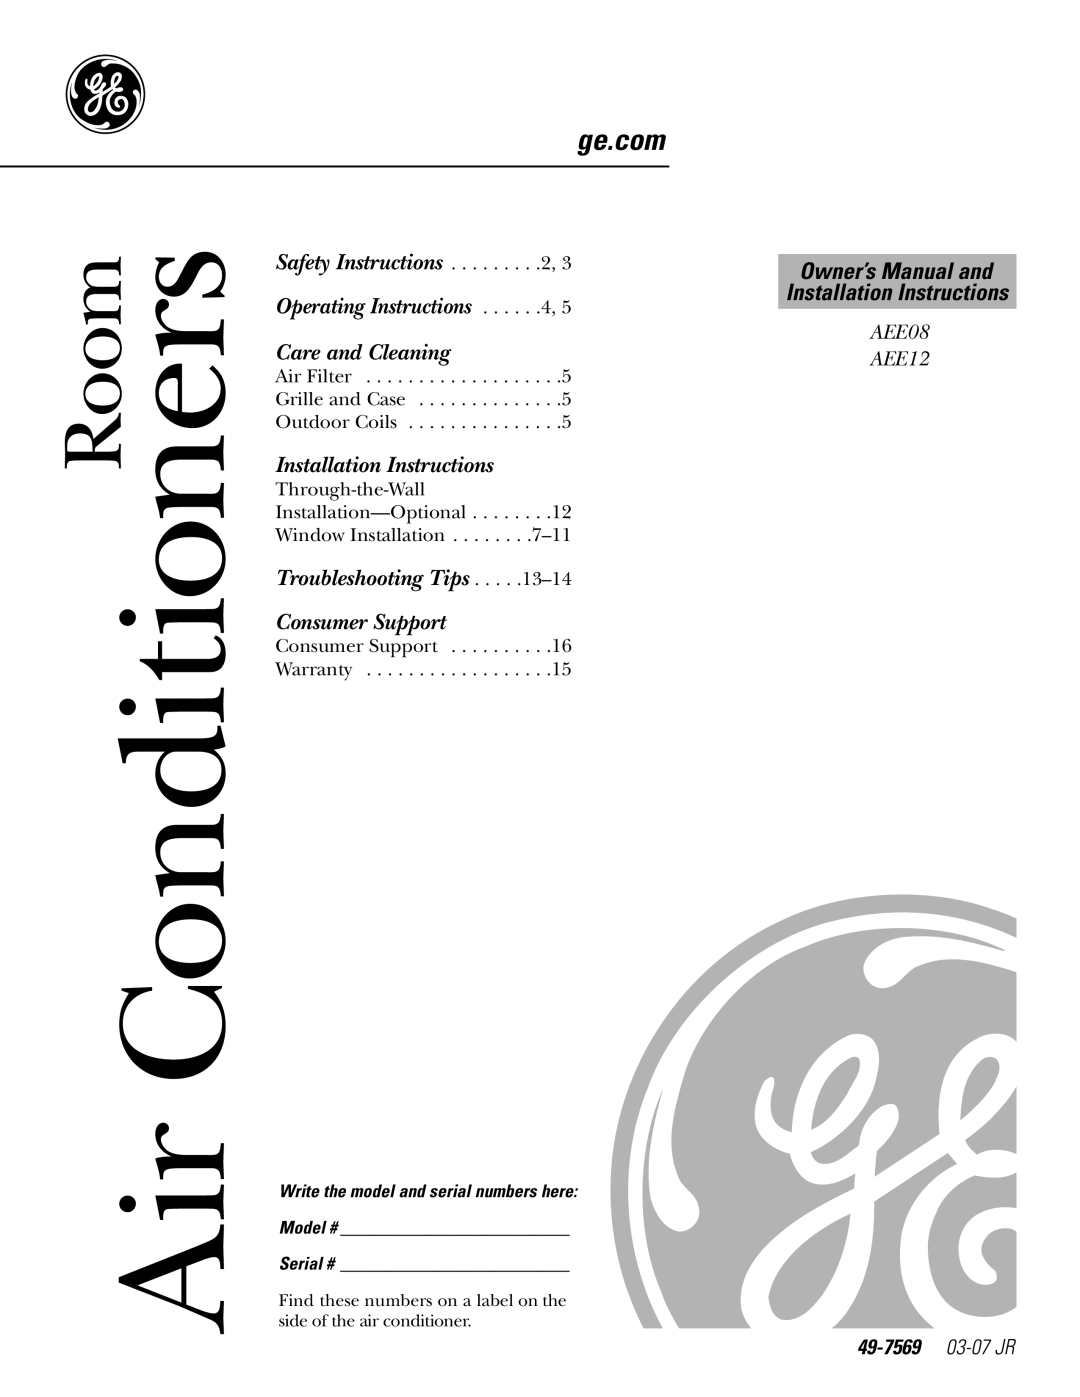 GE AEE12 installation instructions 49-7569 03-07JR, Air Conditioners, Room, Operating Instructions, Care and Cleaning 